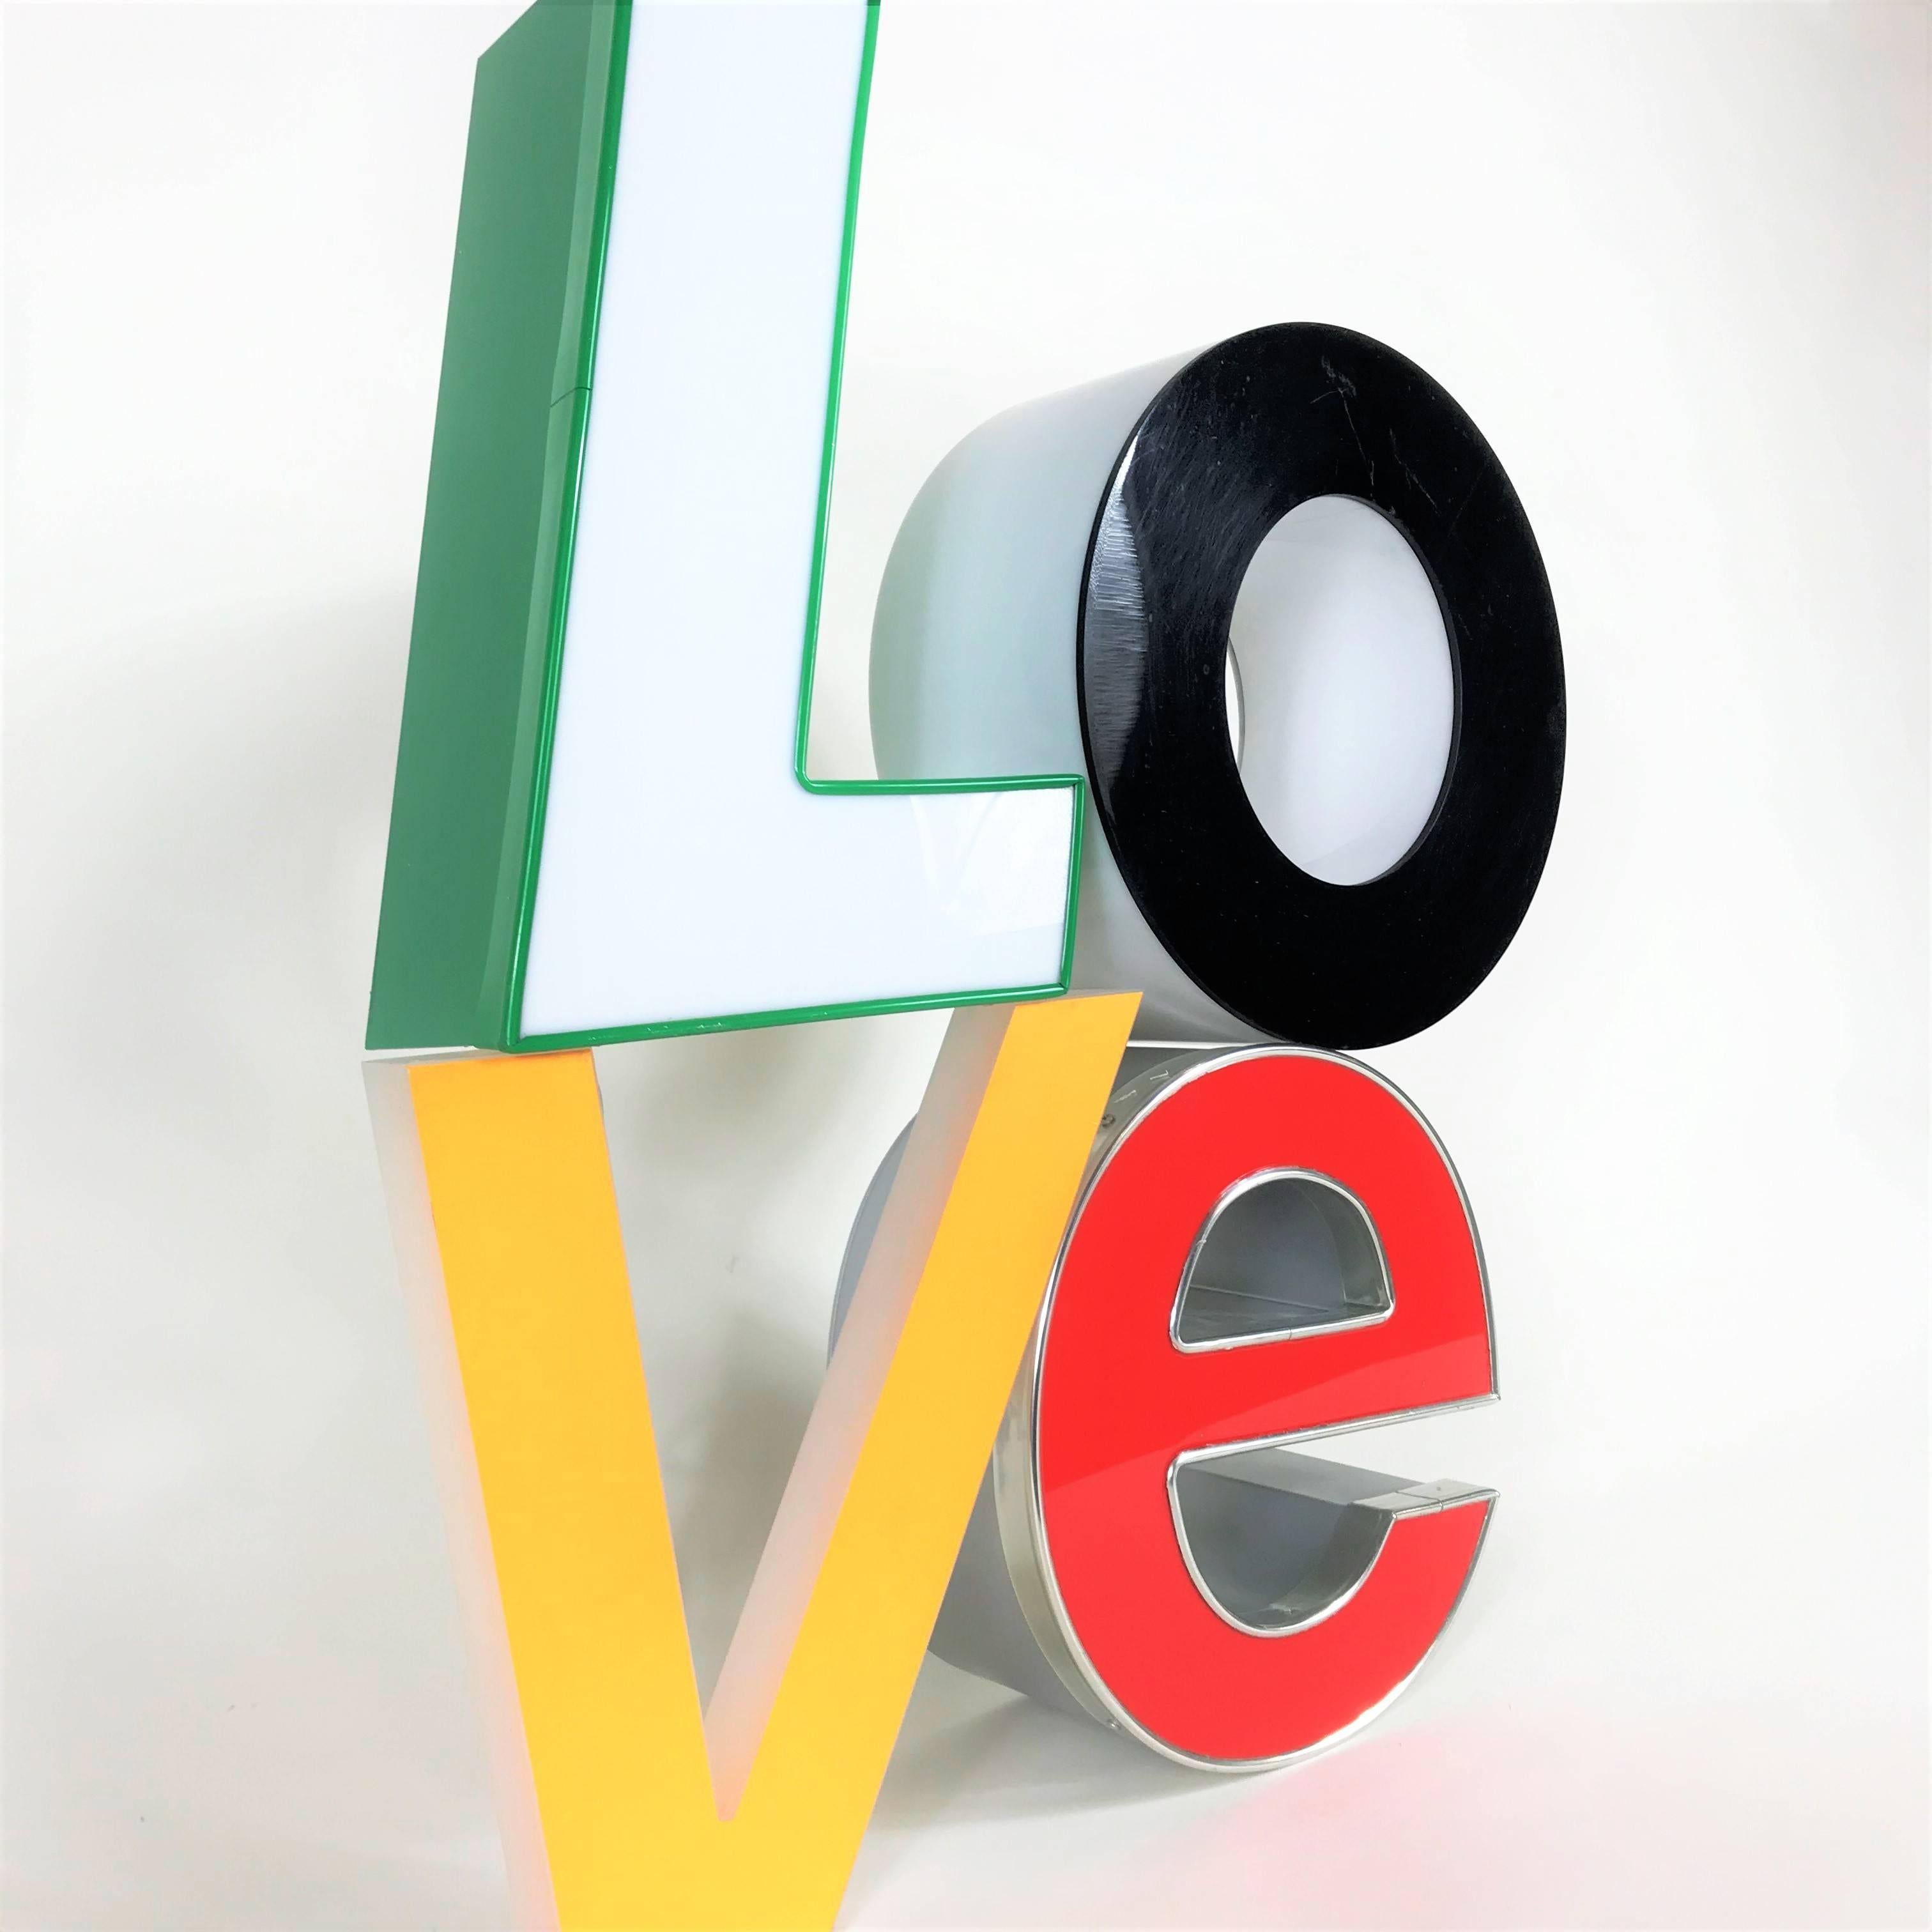 Very decorative late 20th century lighting sculpture inspired by Robert Indiana - the letters create a beautifully soft, indirect light. Completely illuminated 
Rewired with new LEDs - ready to use.
We have more than 500 signs and letters in stock,